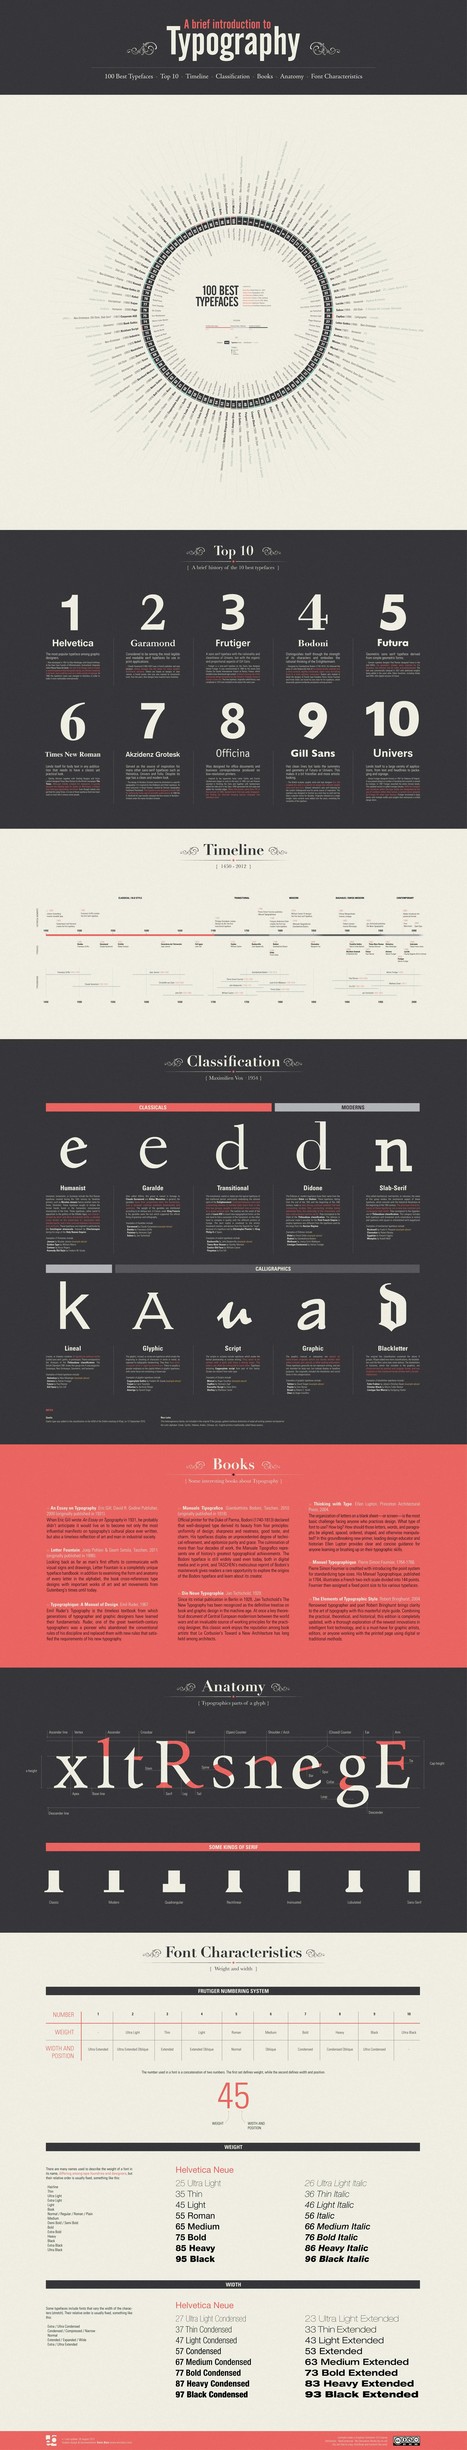 A Brief Introduction to Typography – Infographic | Rapid eLearning | Scoop.it